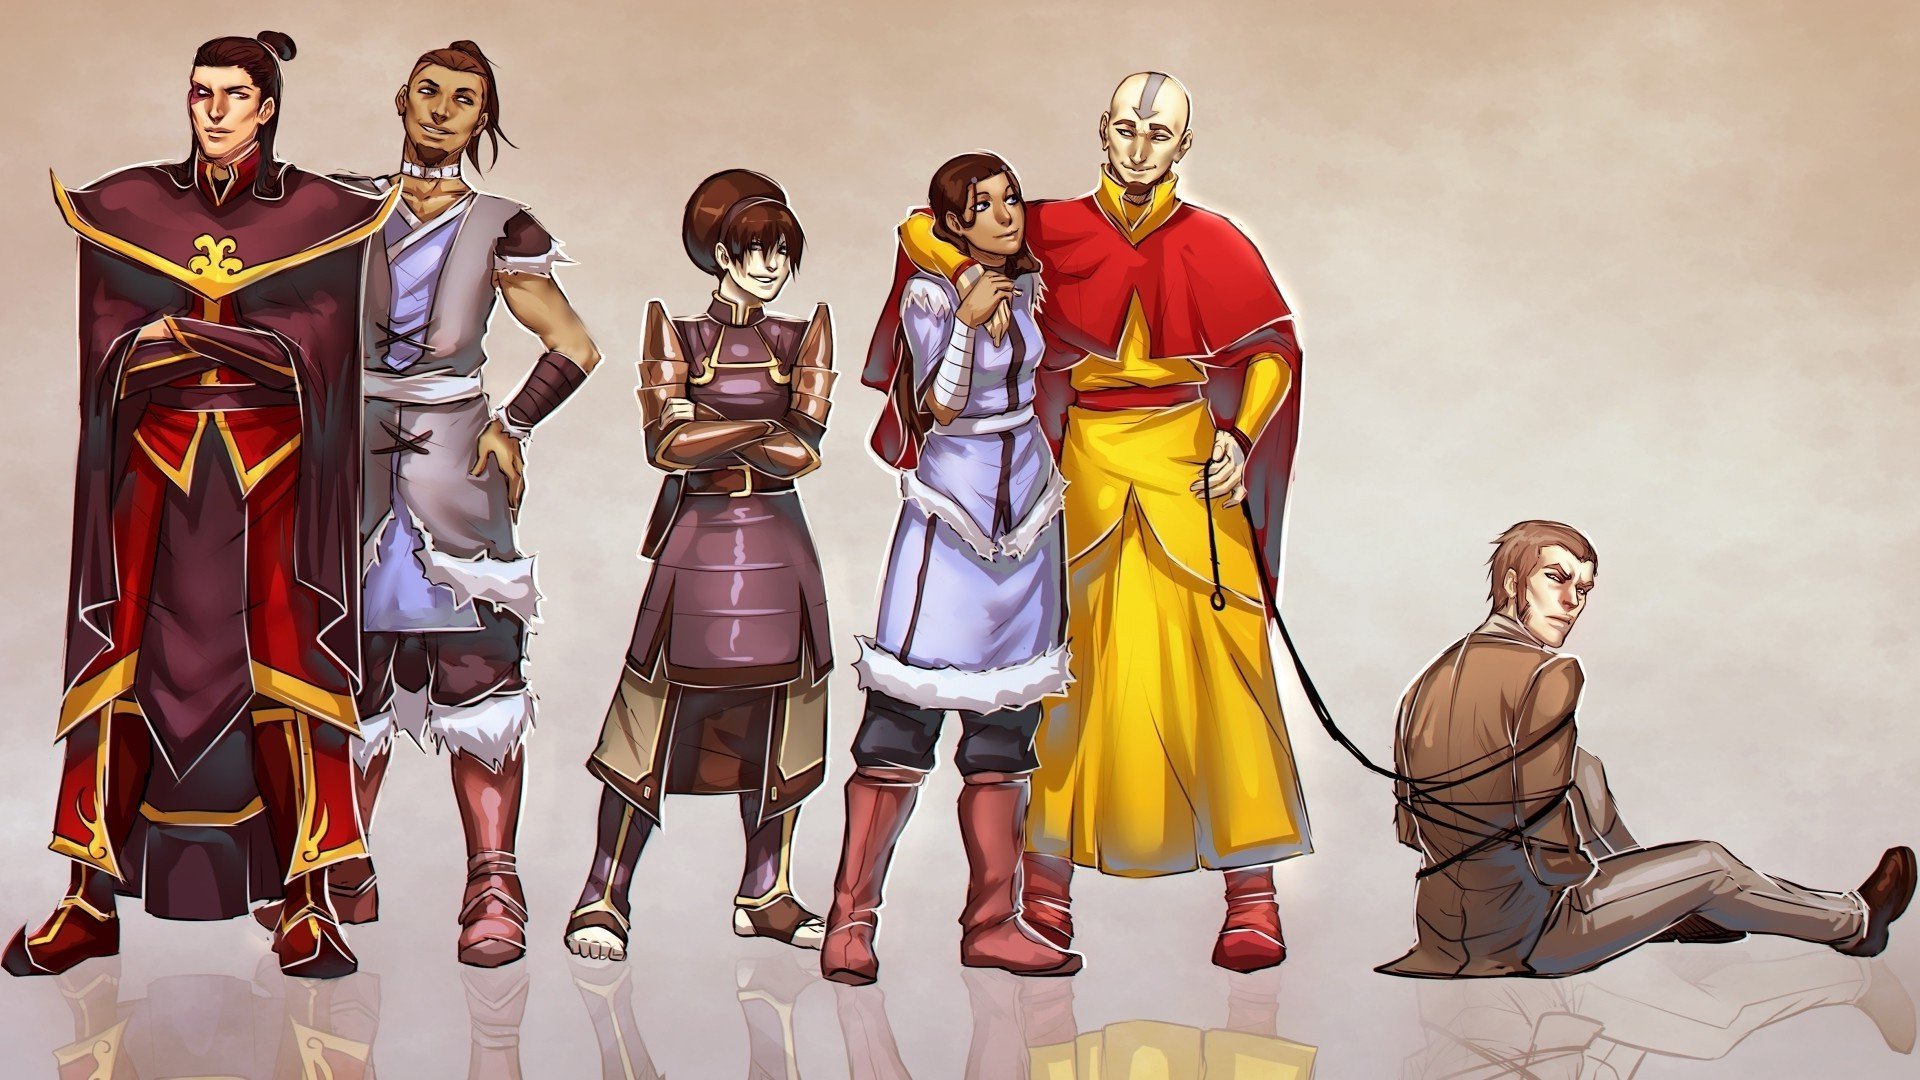 The Last Airbender Wallpapers HD Group (88+)